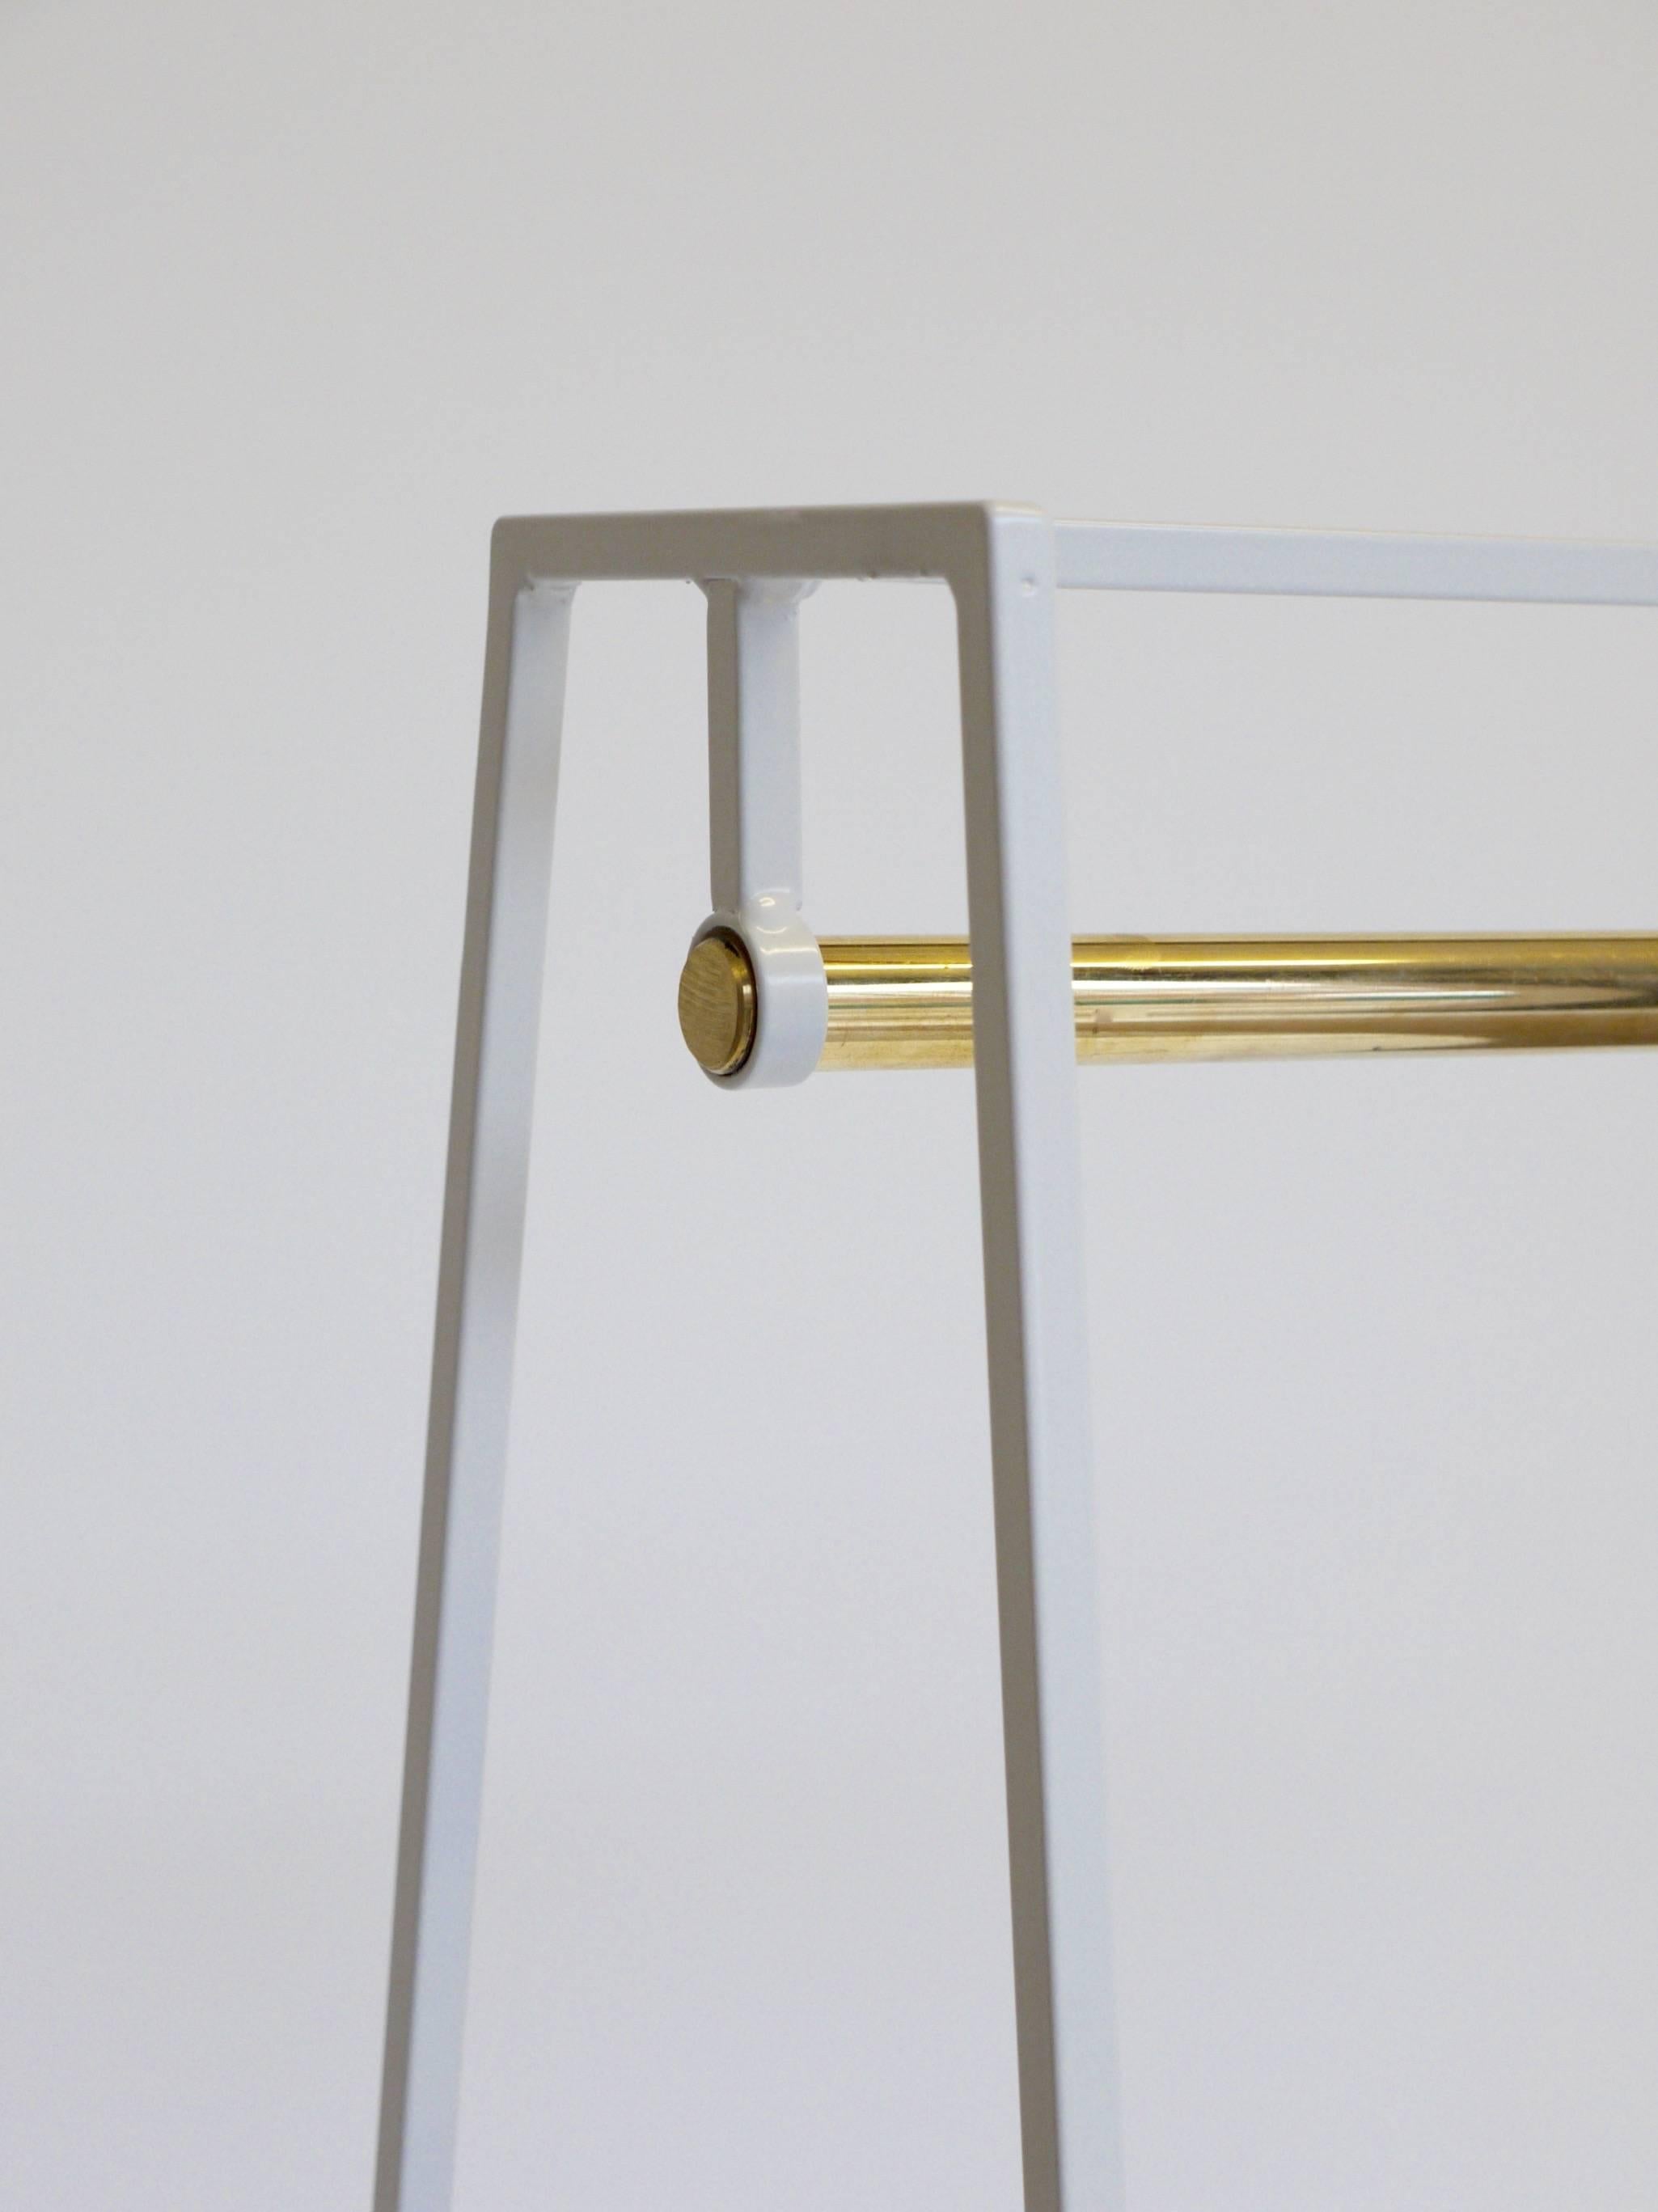 The steel slimline 'A' clothes rail is one of &New's signature pieces. A stunning addition to any bedroom or hallway, the minimal design looks delicate but is surprisingly robust. This one is powder coated in paper white, but the clothes rail is